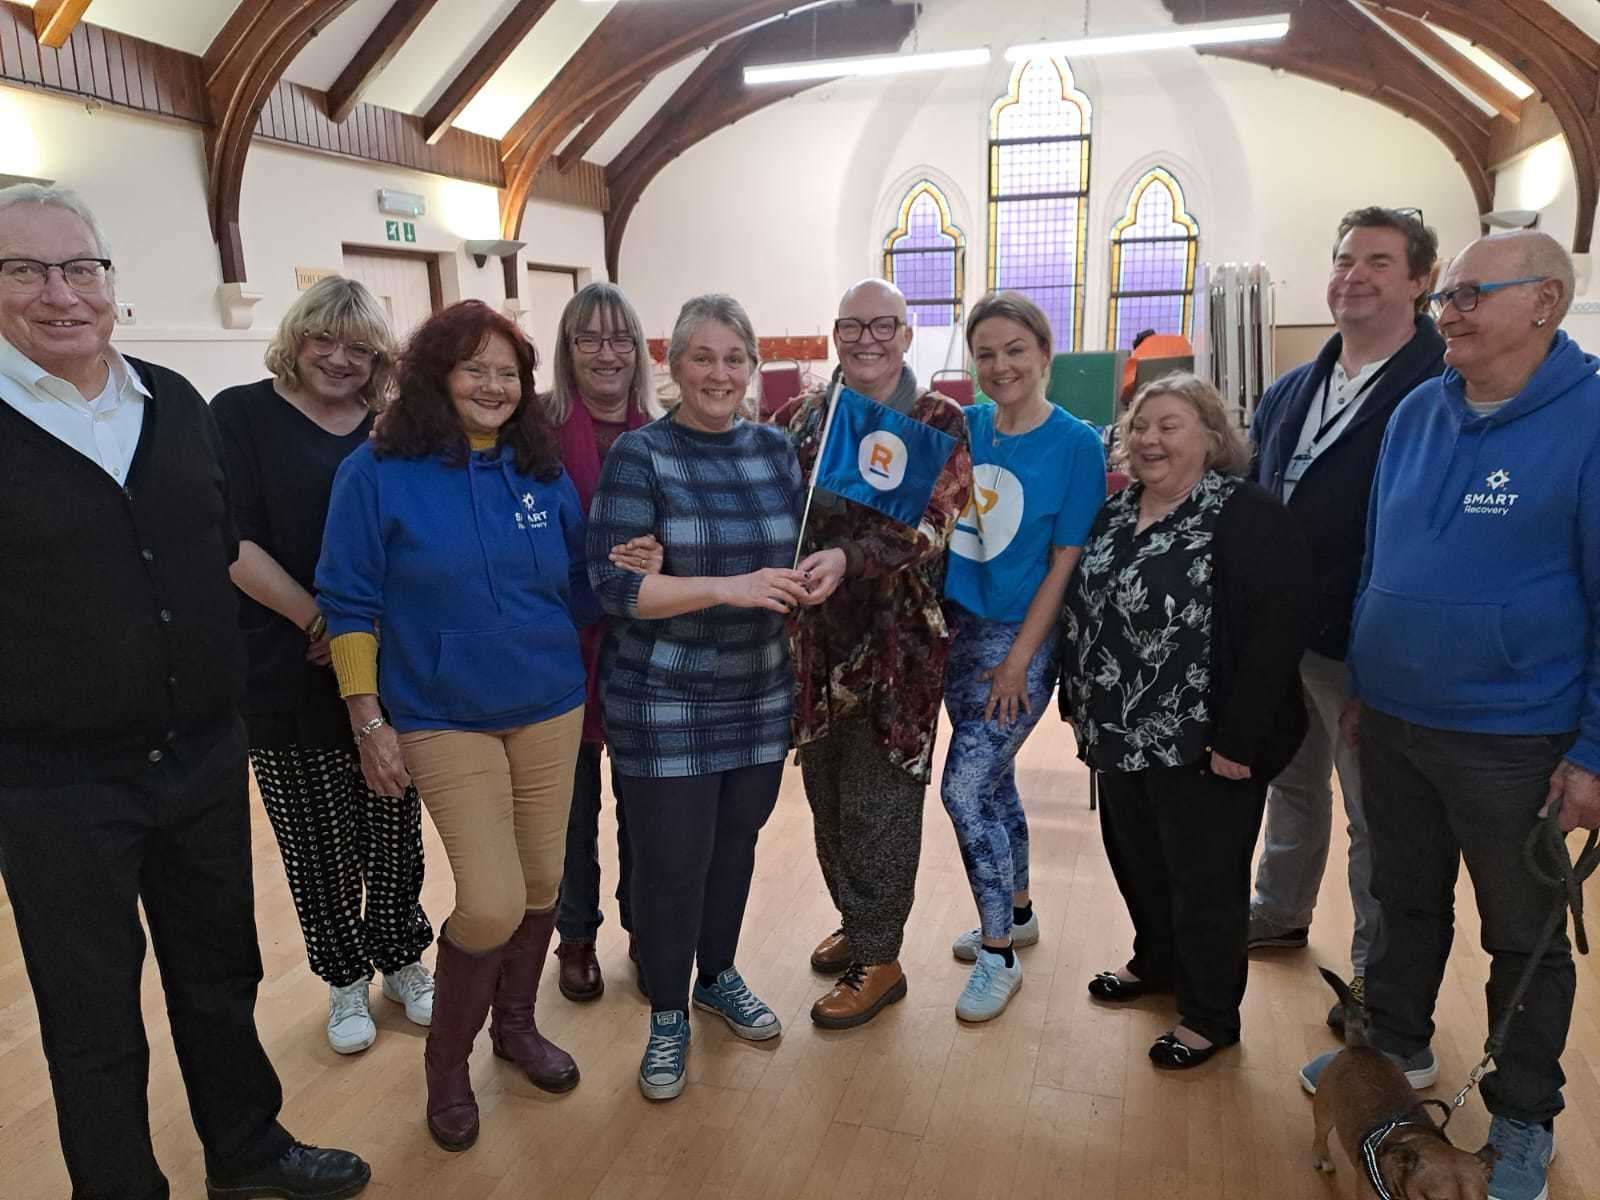 From left: Andy, Pam, Maggie, Jane, Debbie Smith SMART facilitator, Sharan Brown ACI manager, Natalie Manly Recovery Communities development officer susie, Andrew Garraway Highland Drug and alcohol partnership and Robbi Lyttle SMART Facilitator.